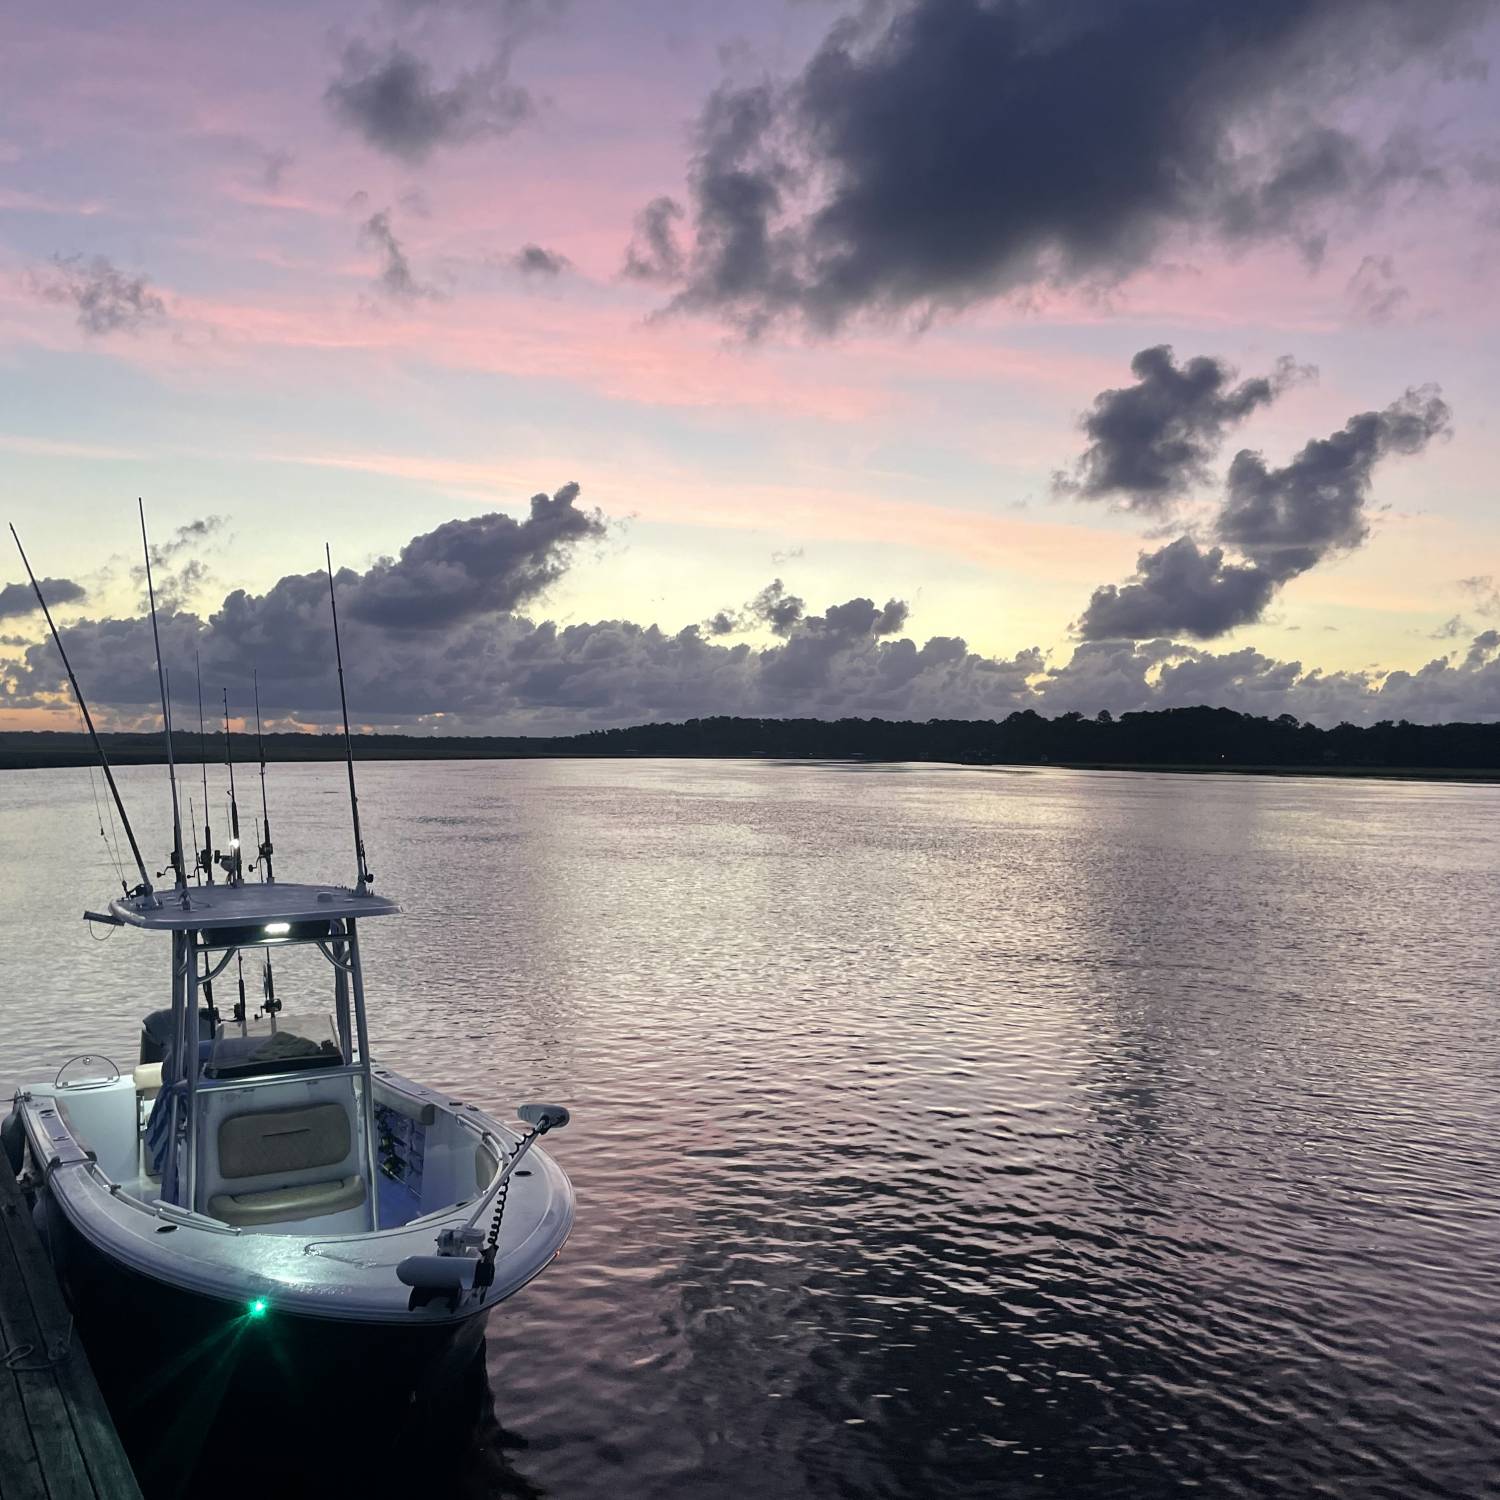 Title: Time to head out - On board their Sportsman Open 232 Center Console - Location: Shellman Bluff, Ga. Participating in the Photo Contest #SportsmanJuly